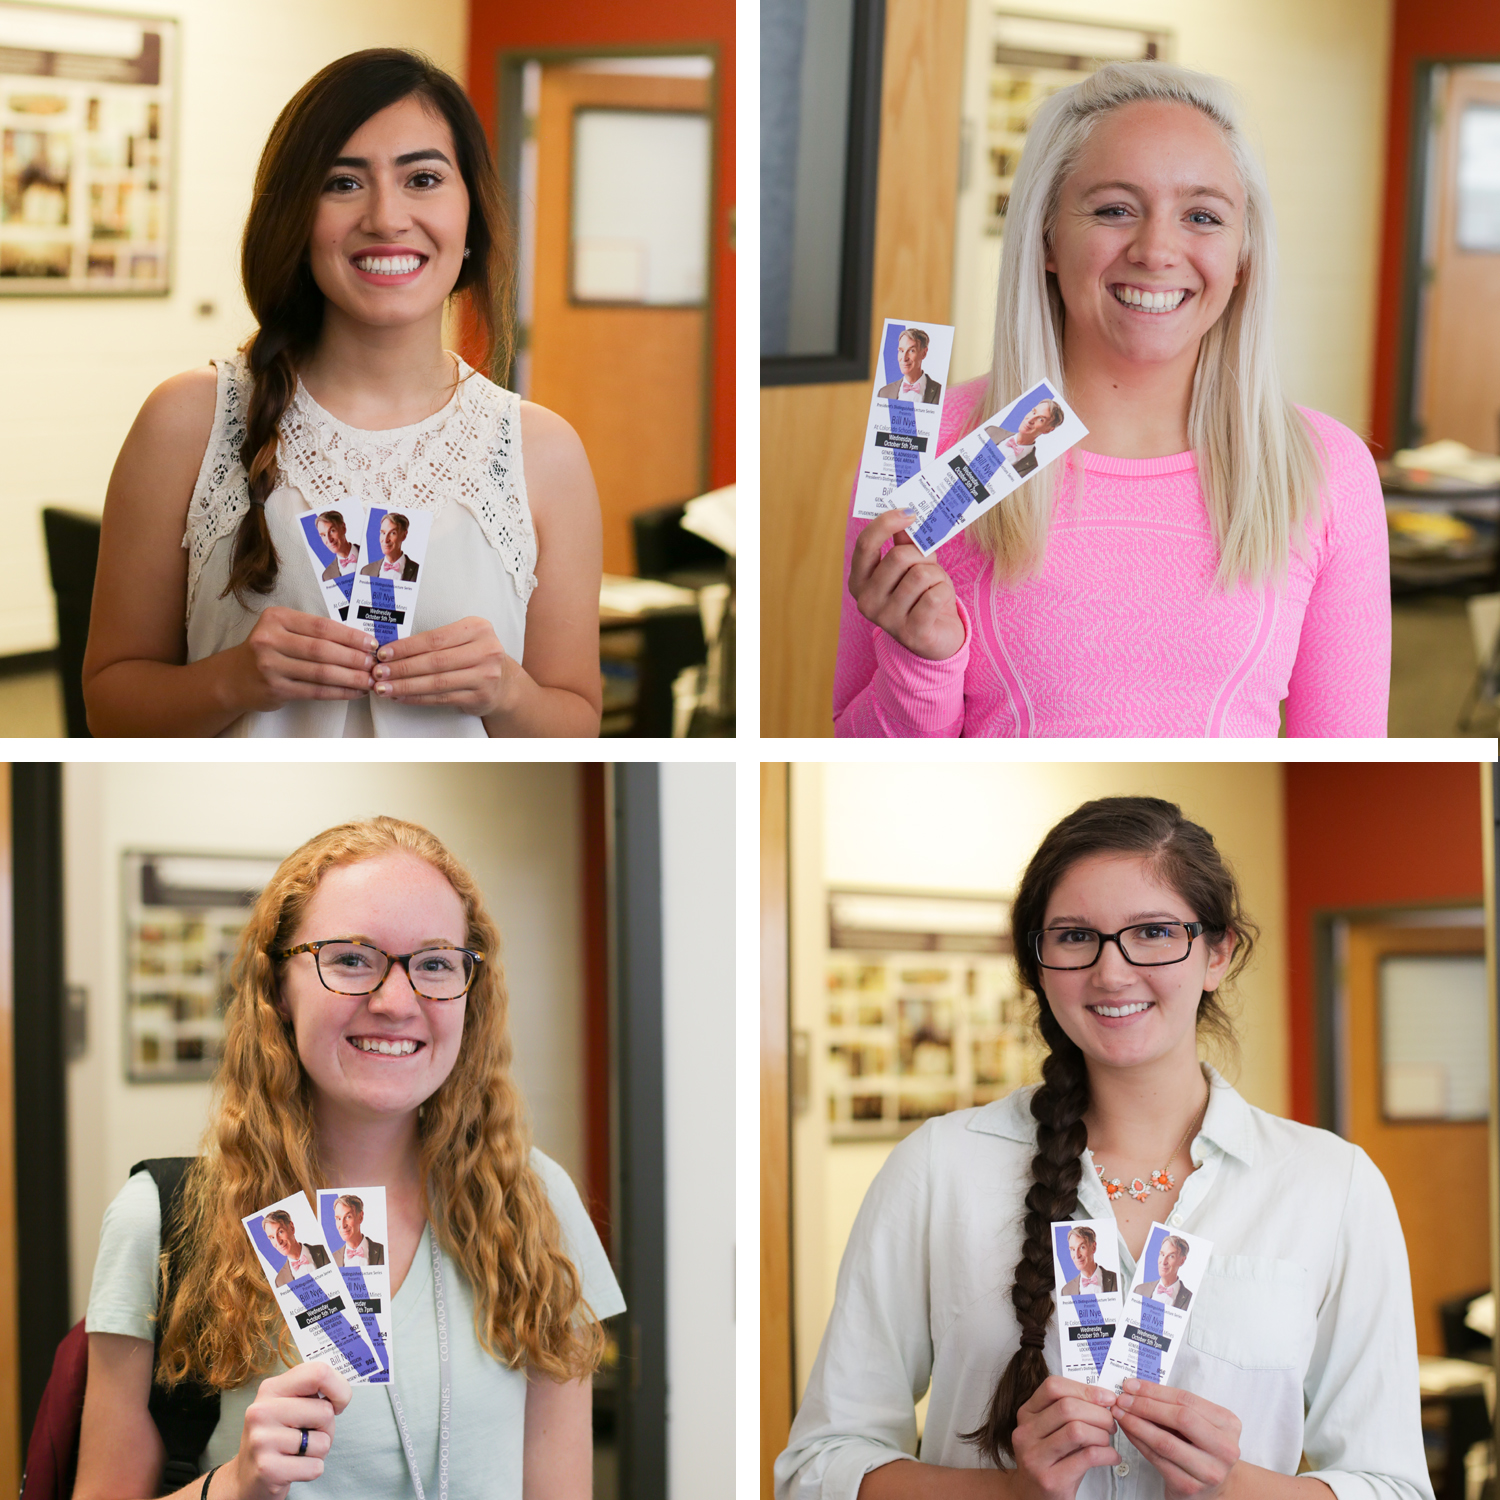 #MinesGeek contest winners, Haley Whalen, Katie Varnadoe, Andrea Mackie and Madeline Behr, holding their tickets to see Bill Nye The Science Guy